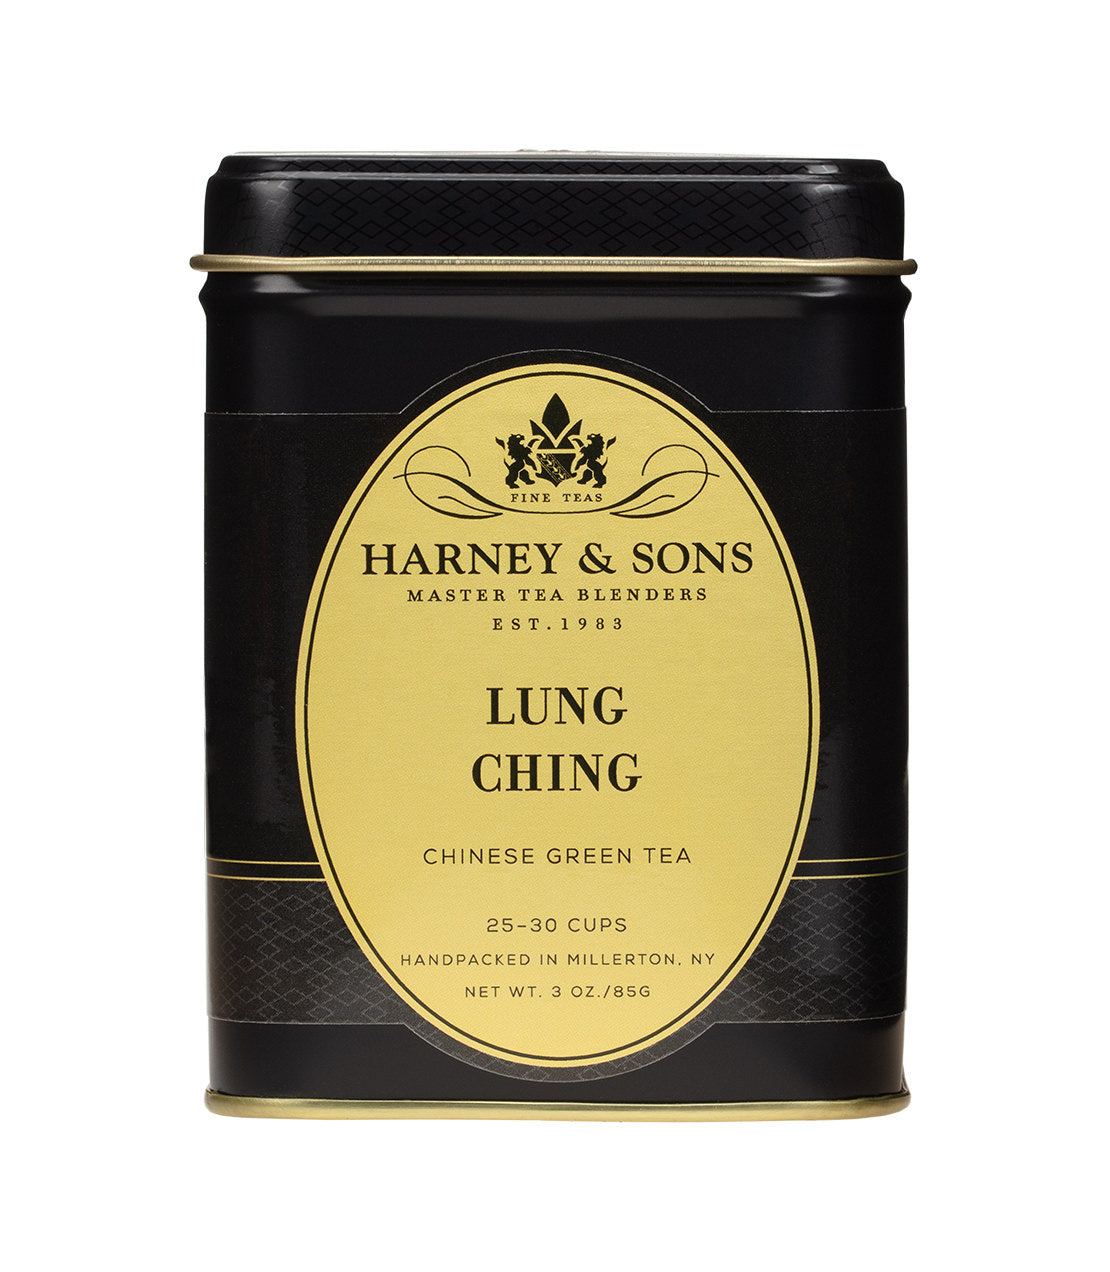 Lung Ching - Loose 3 oz. Tin - Harney & Sons Fine Teas